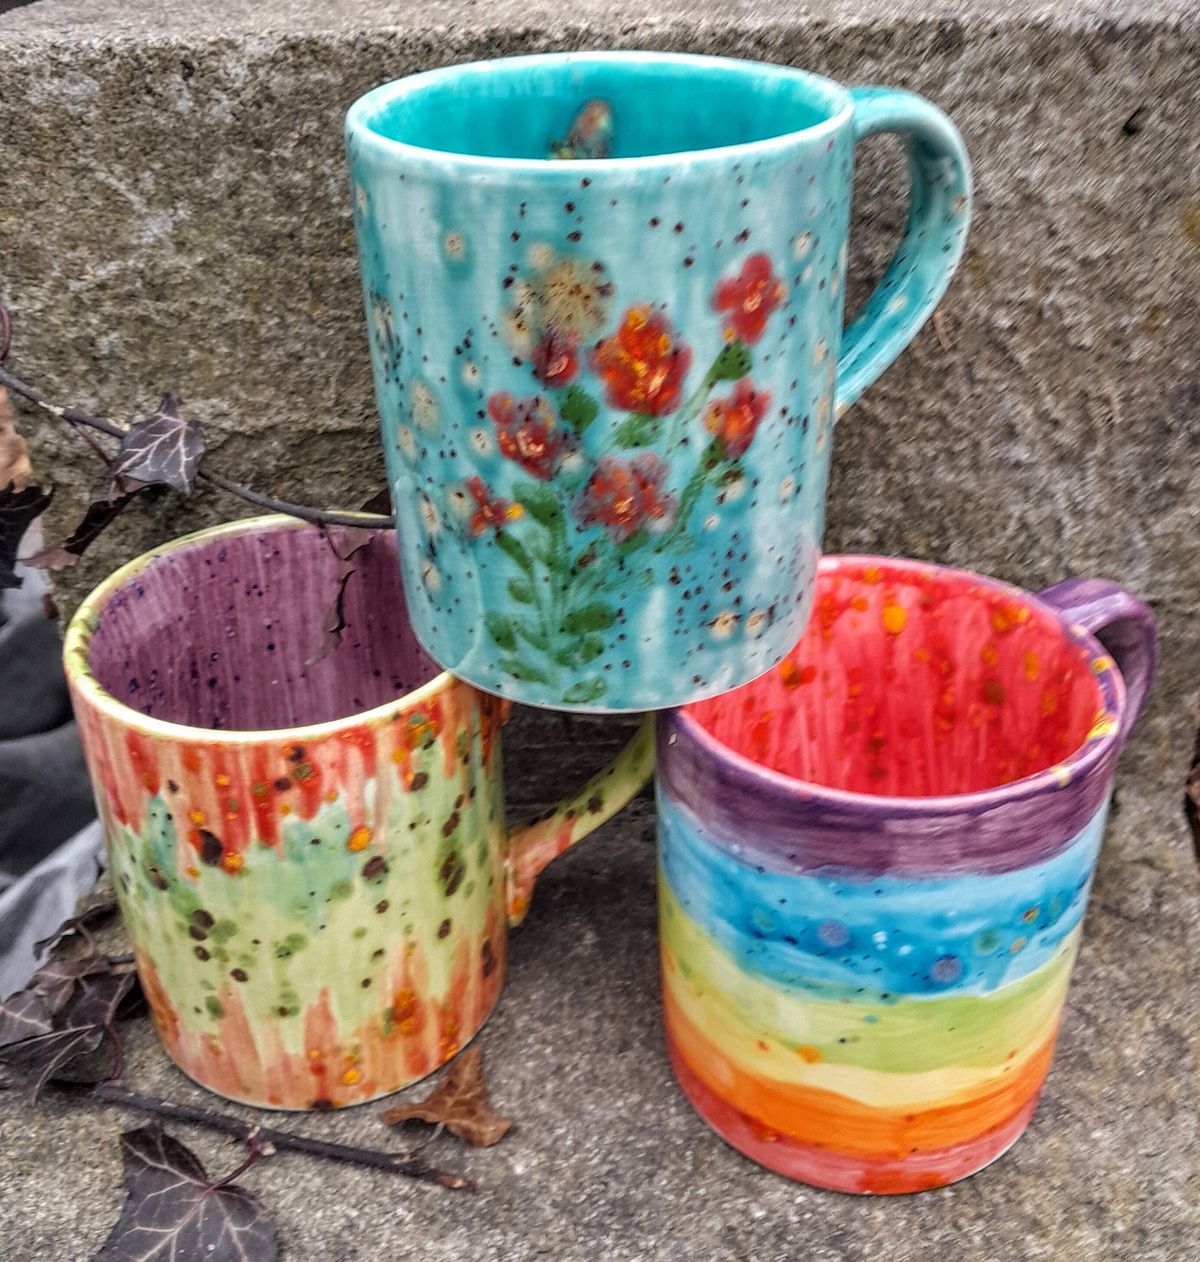 Paint Your Own Mug at Art Attic in Plymouth 5\/31!